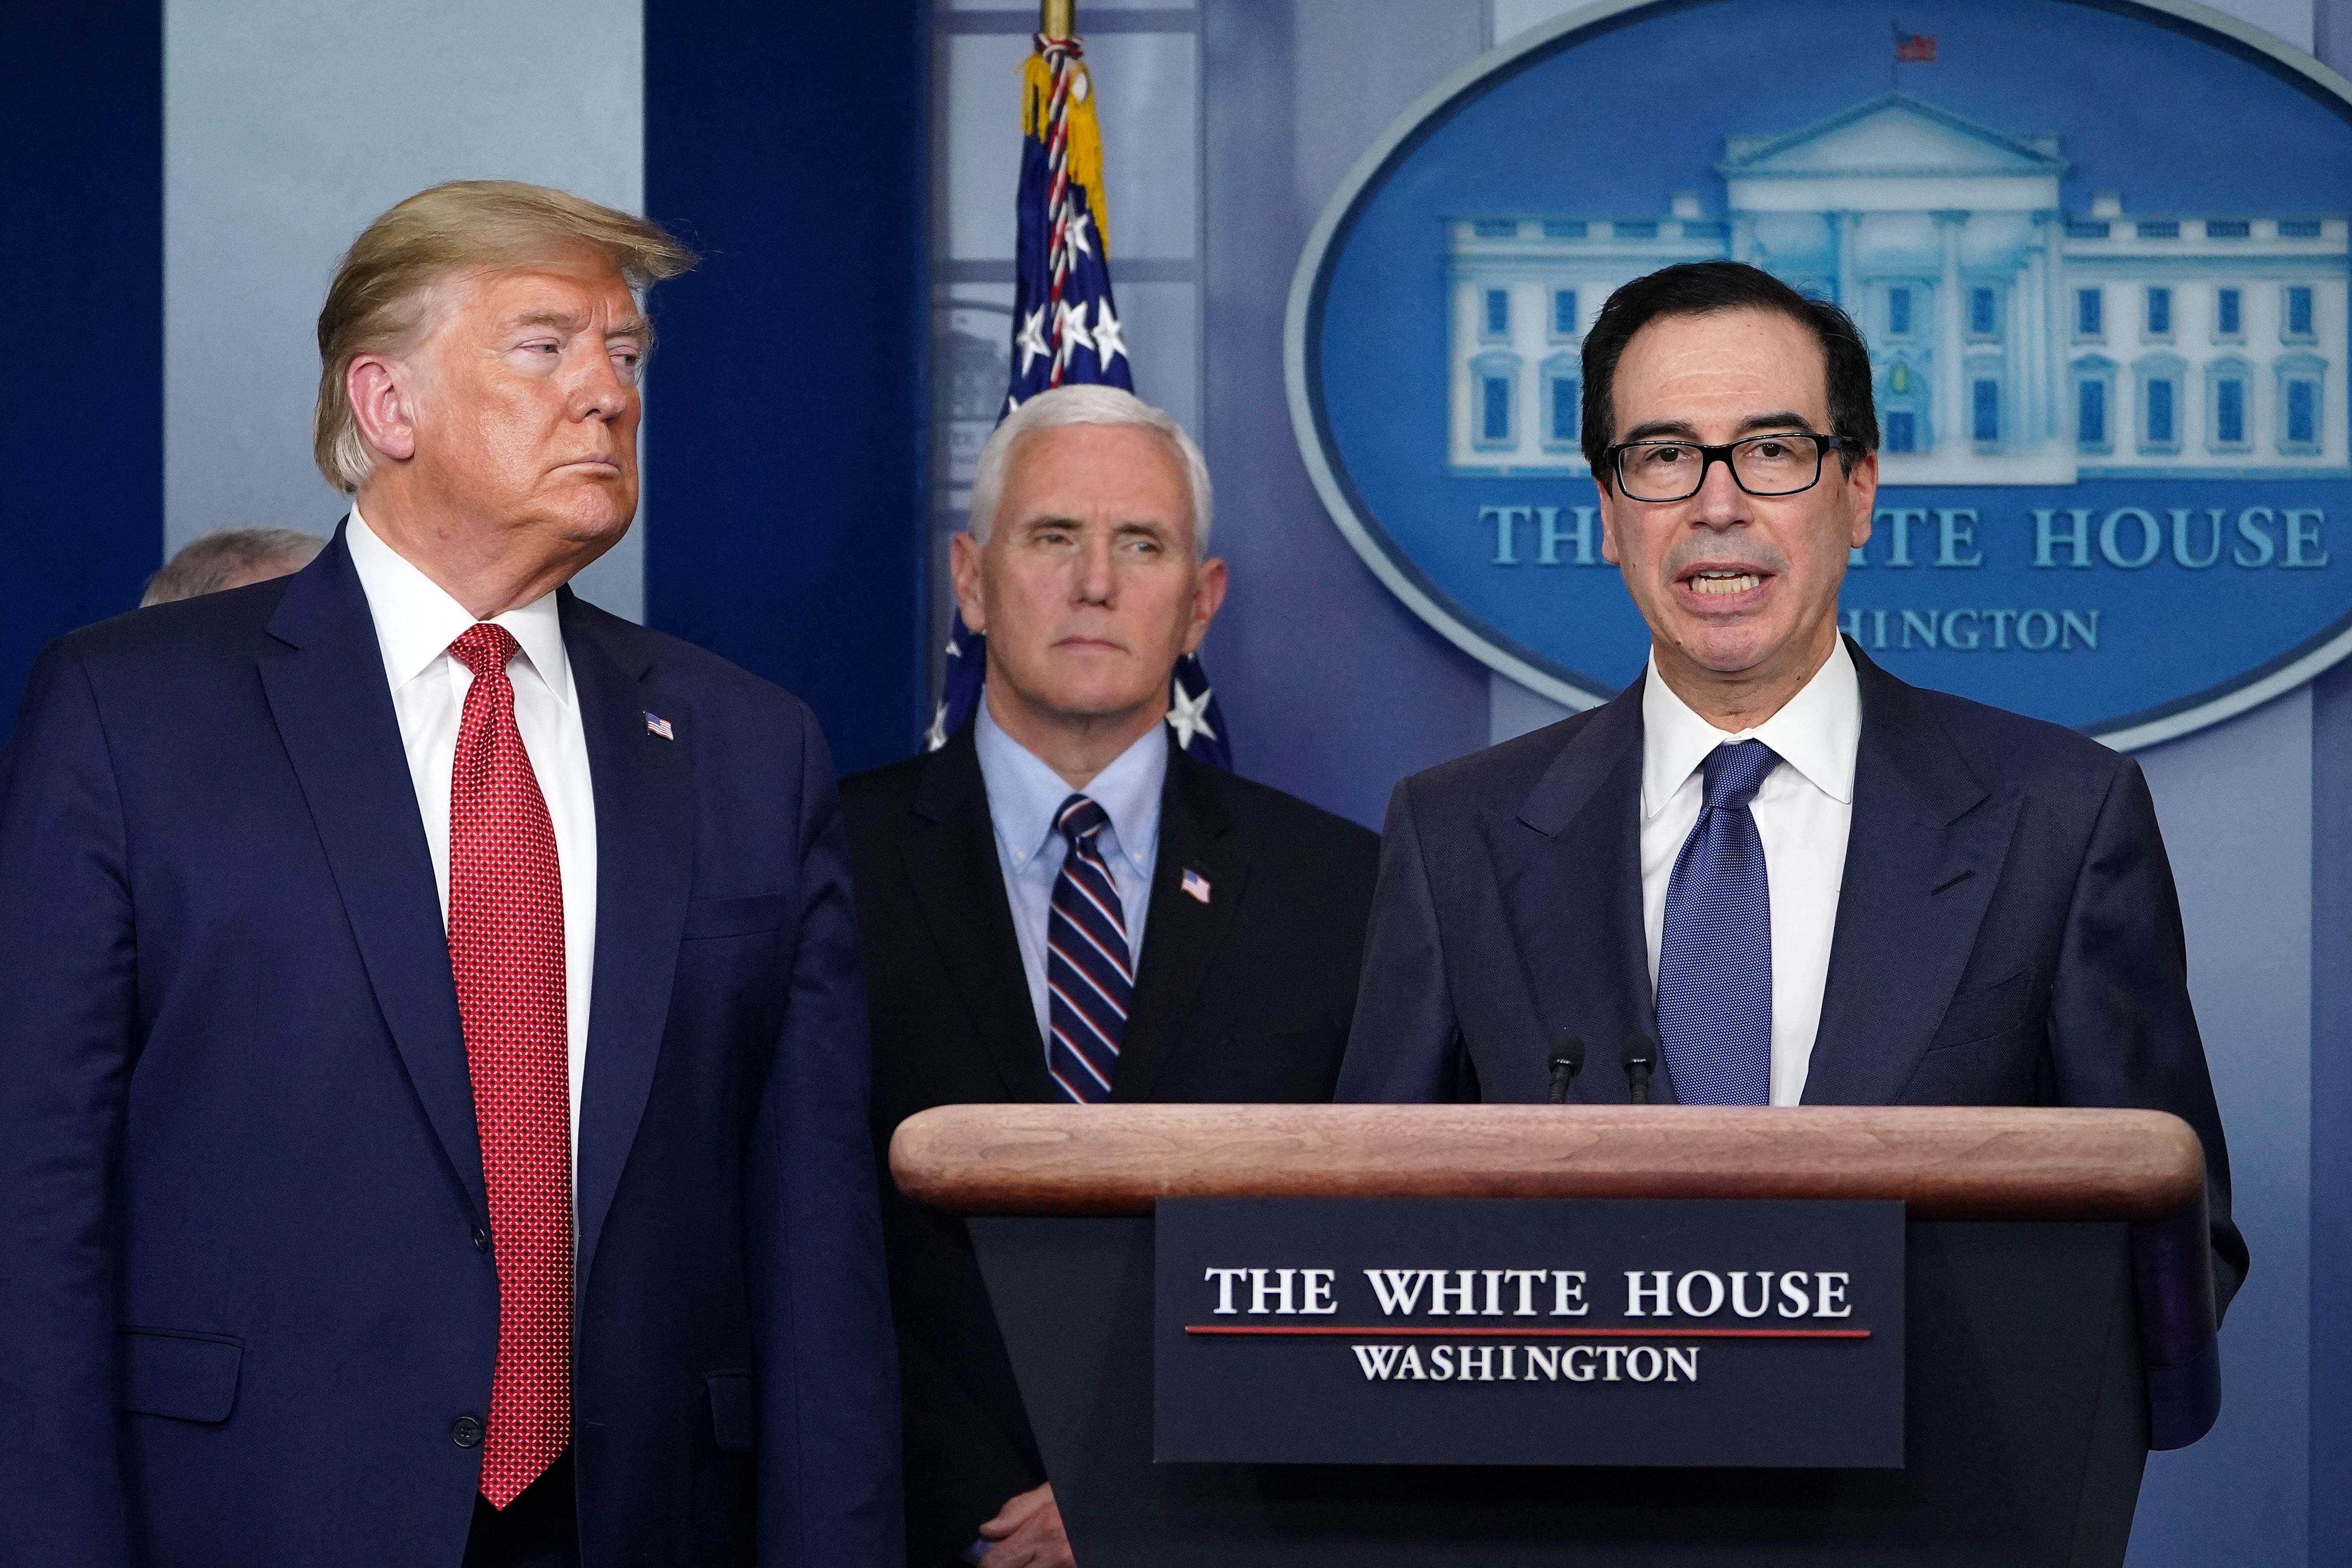 Then-U.S. Treasury Secretary Steven Mnuchin speaks during a press conference about the COVID-19 coronavirus outbreak as President Donald Trump looks on.  (Photo by MANDEL NGAN/AFP).